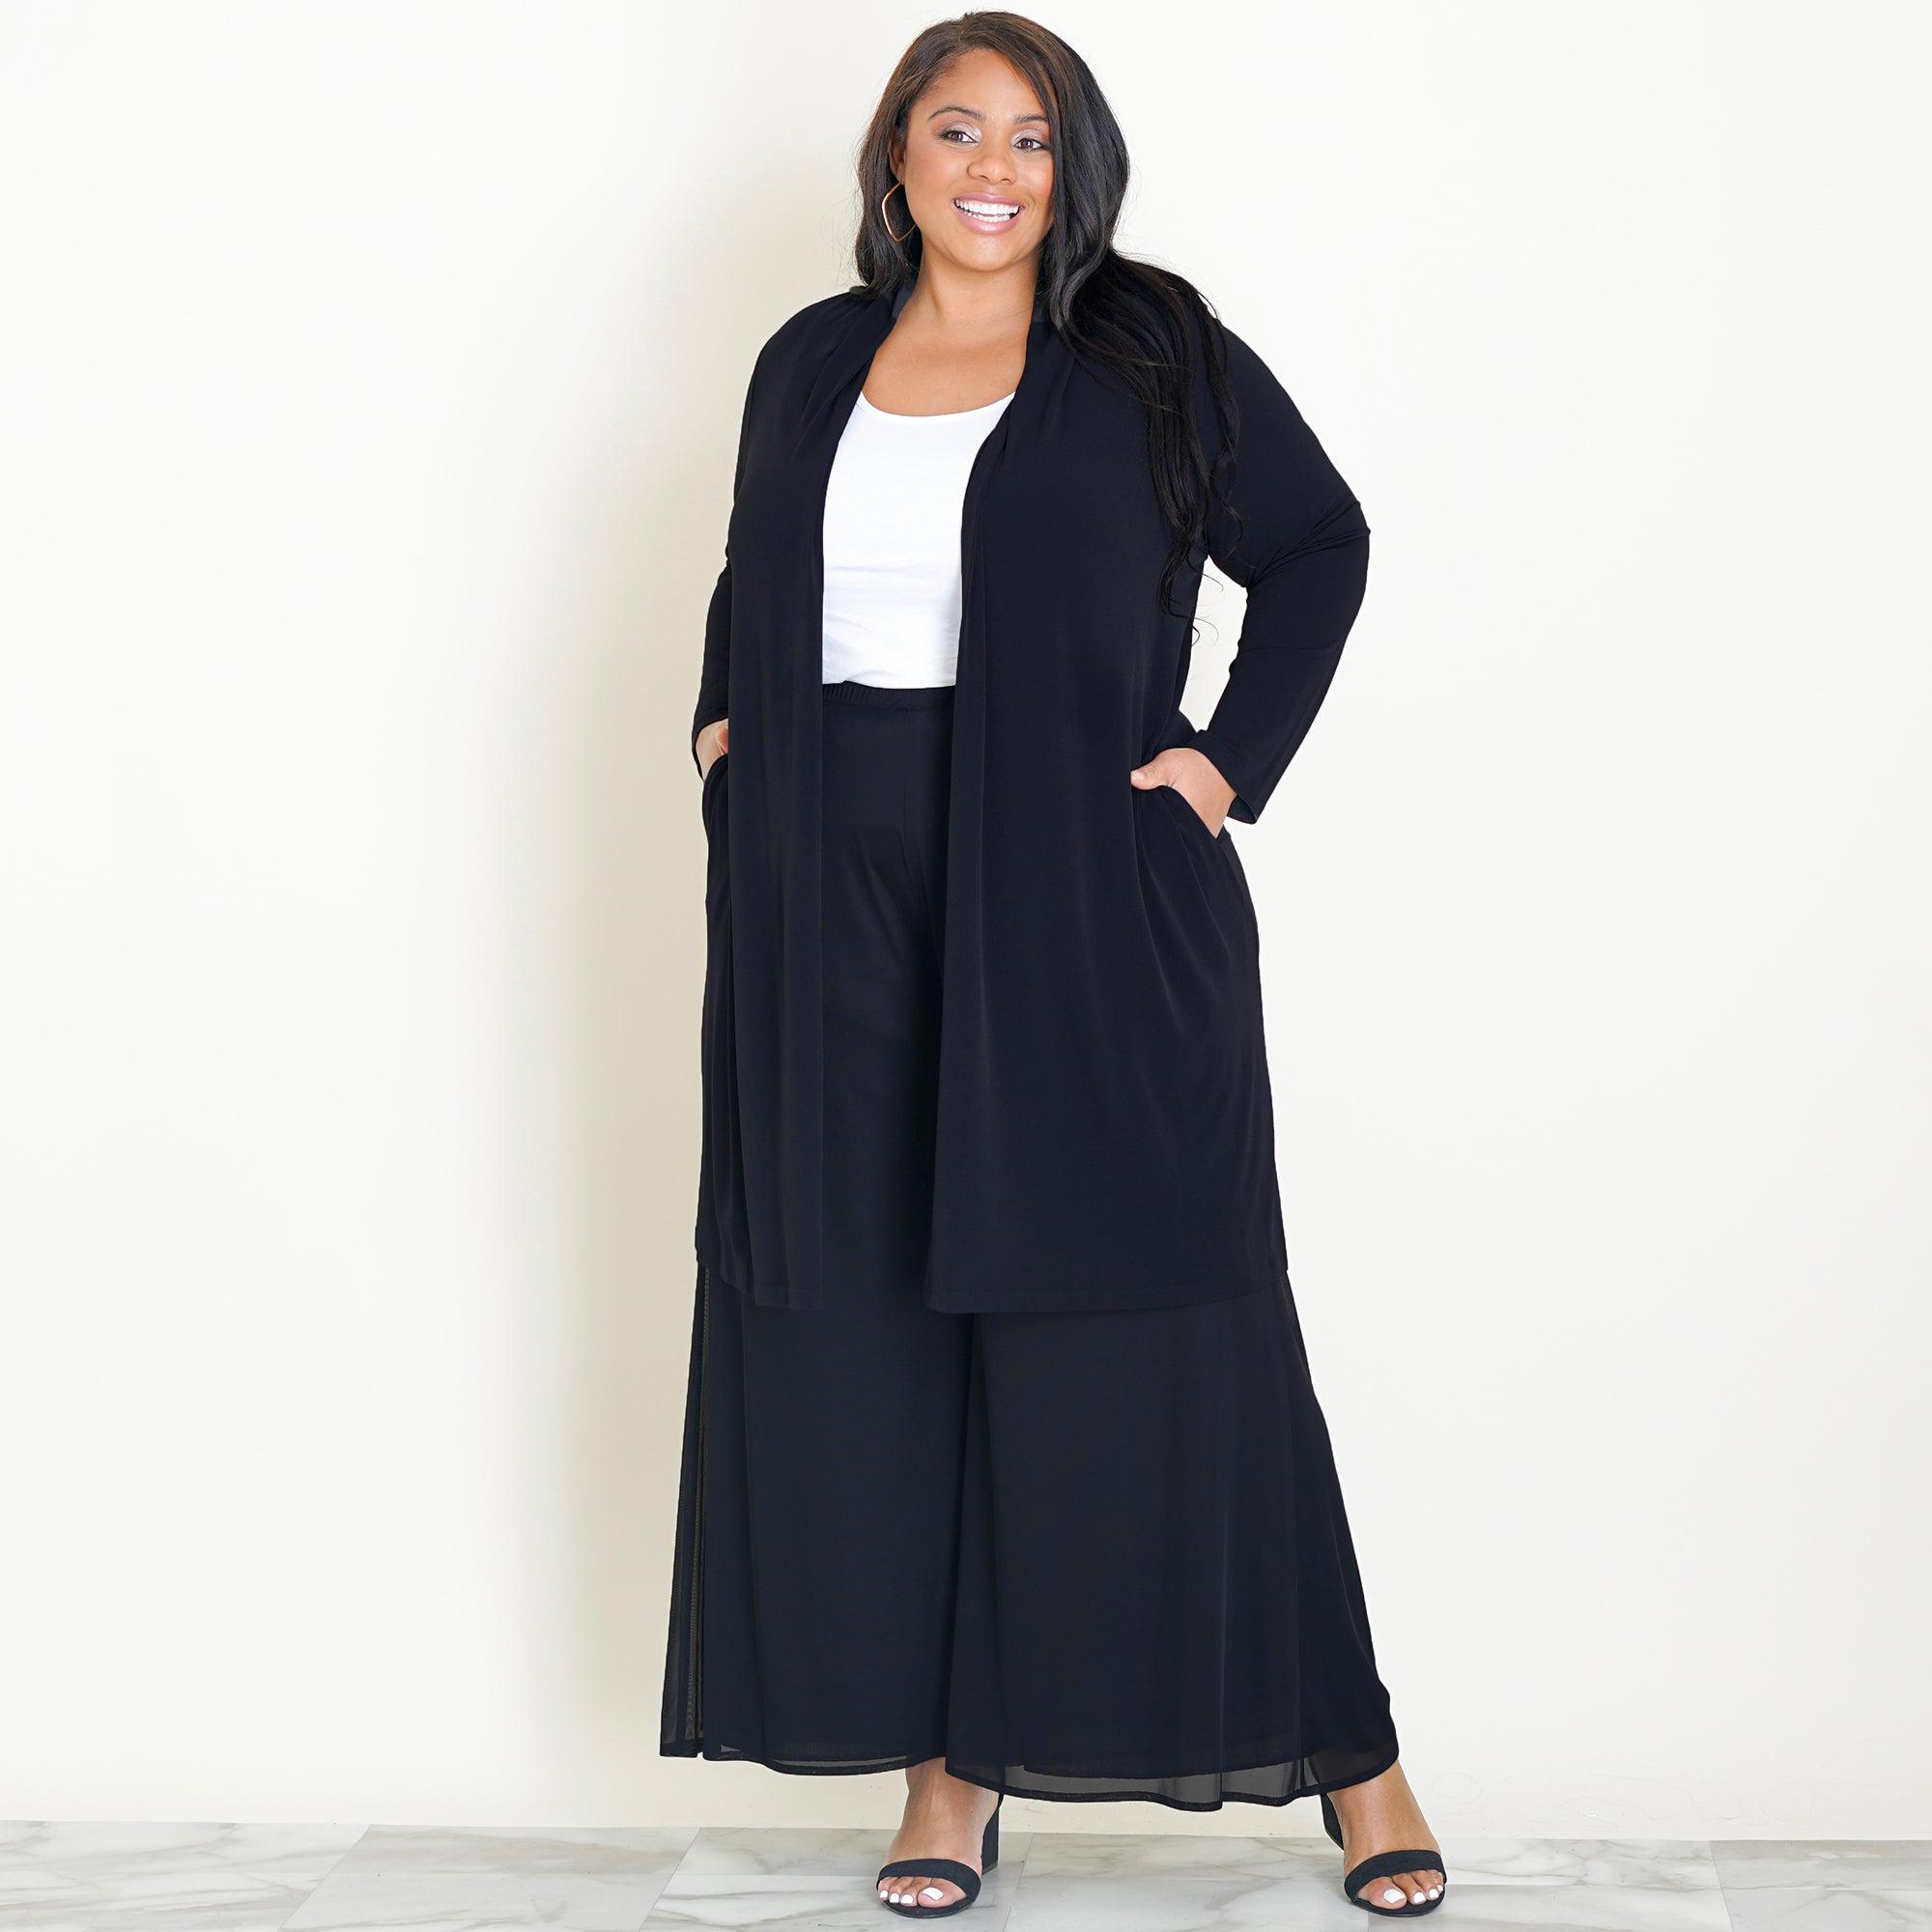 Woman posing wearing Black CAxLZ Bianca Black Open Front Cardigan from Connected Apparel